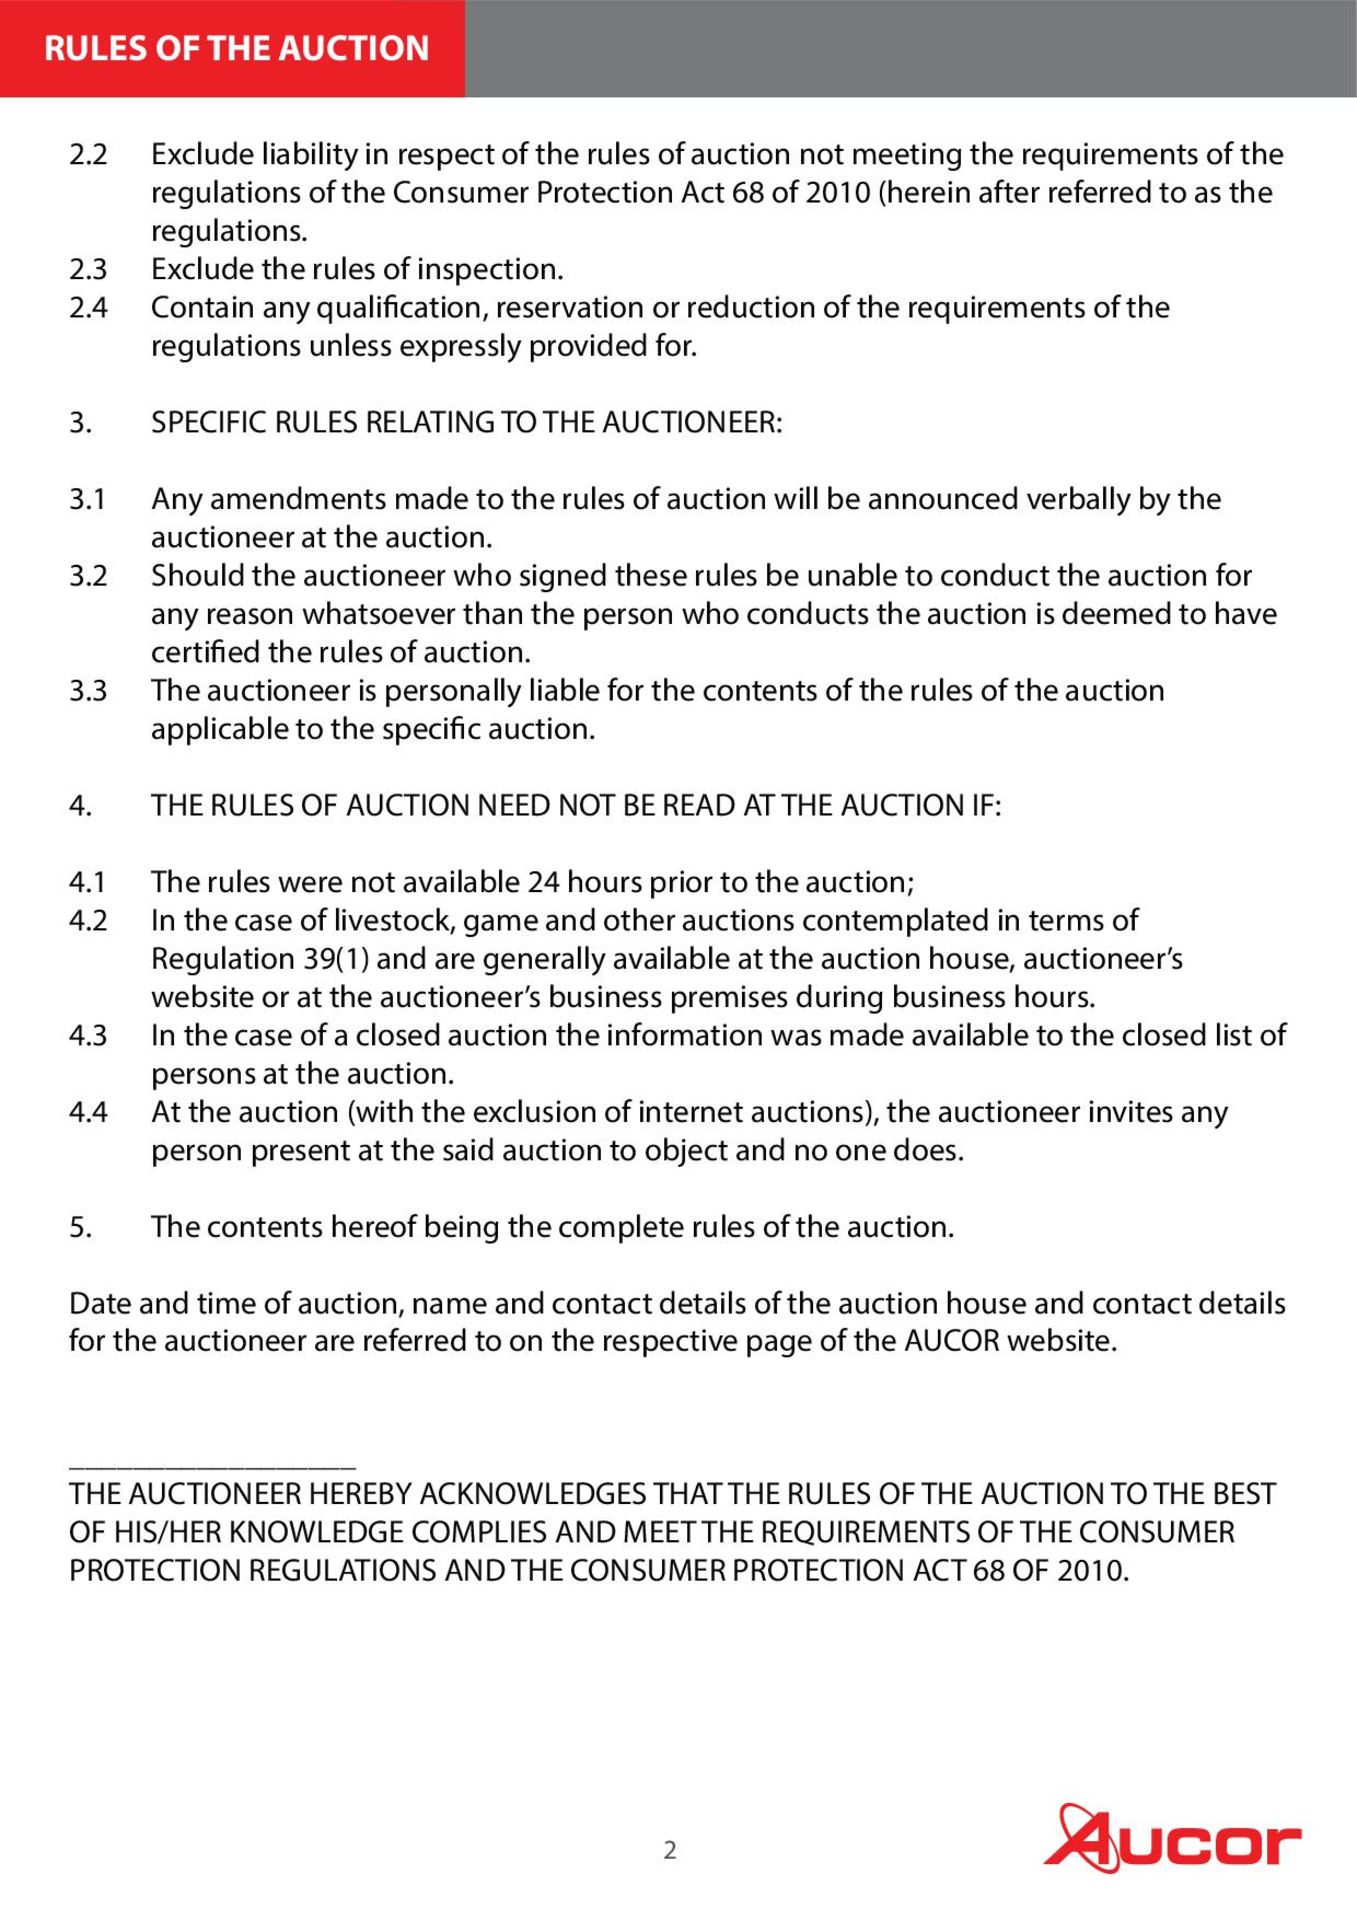 Rules of the Auction - Image 2 of 2